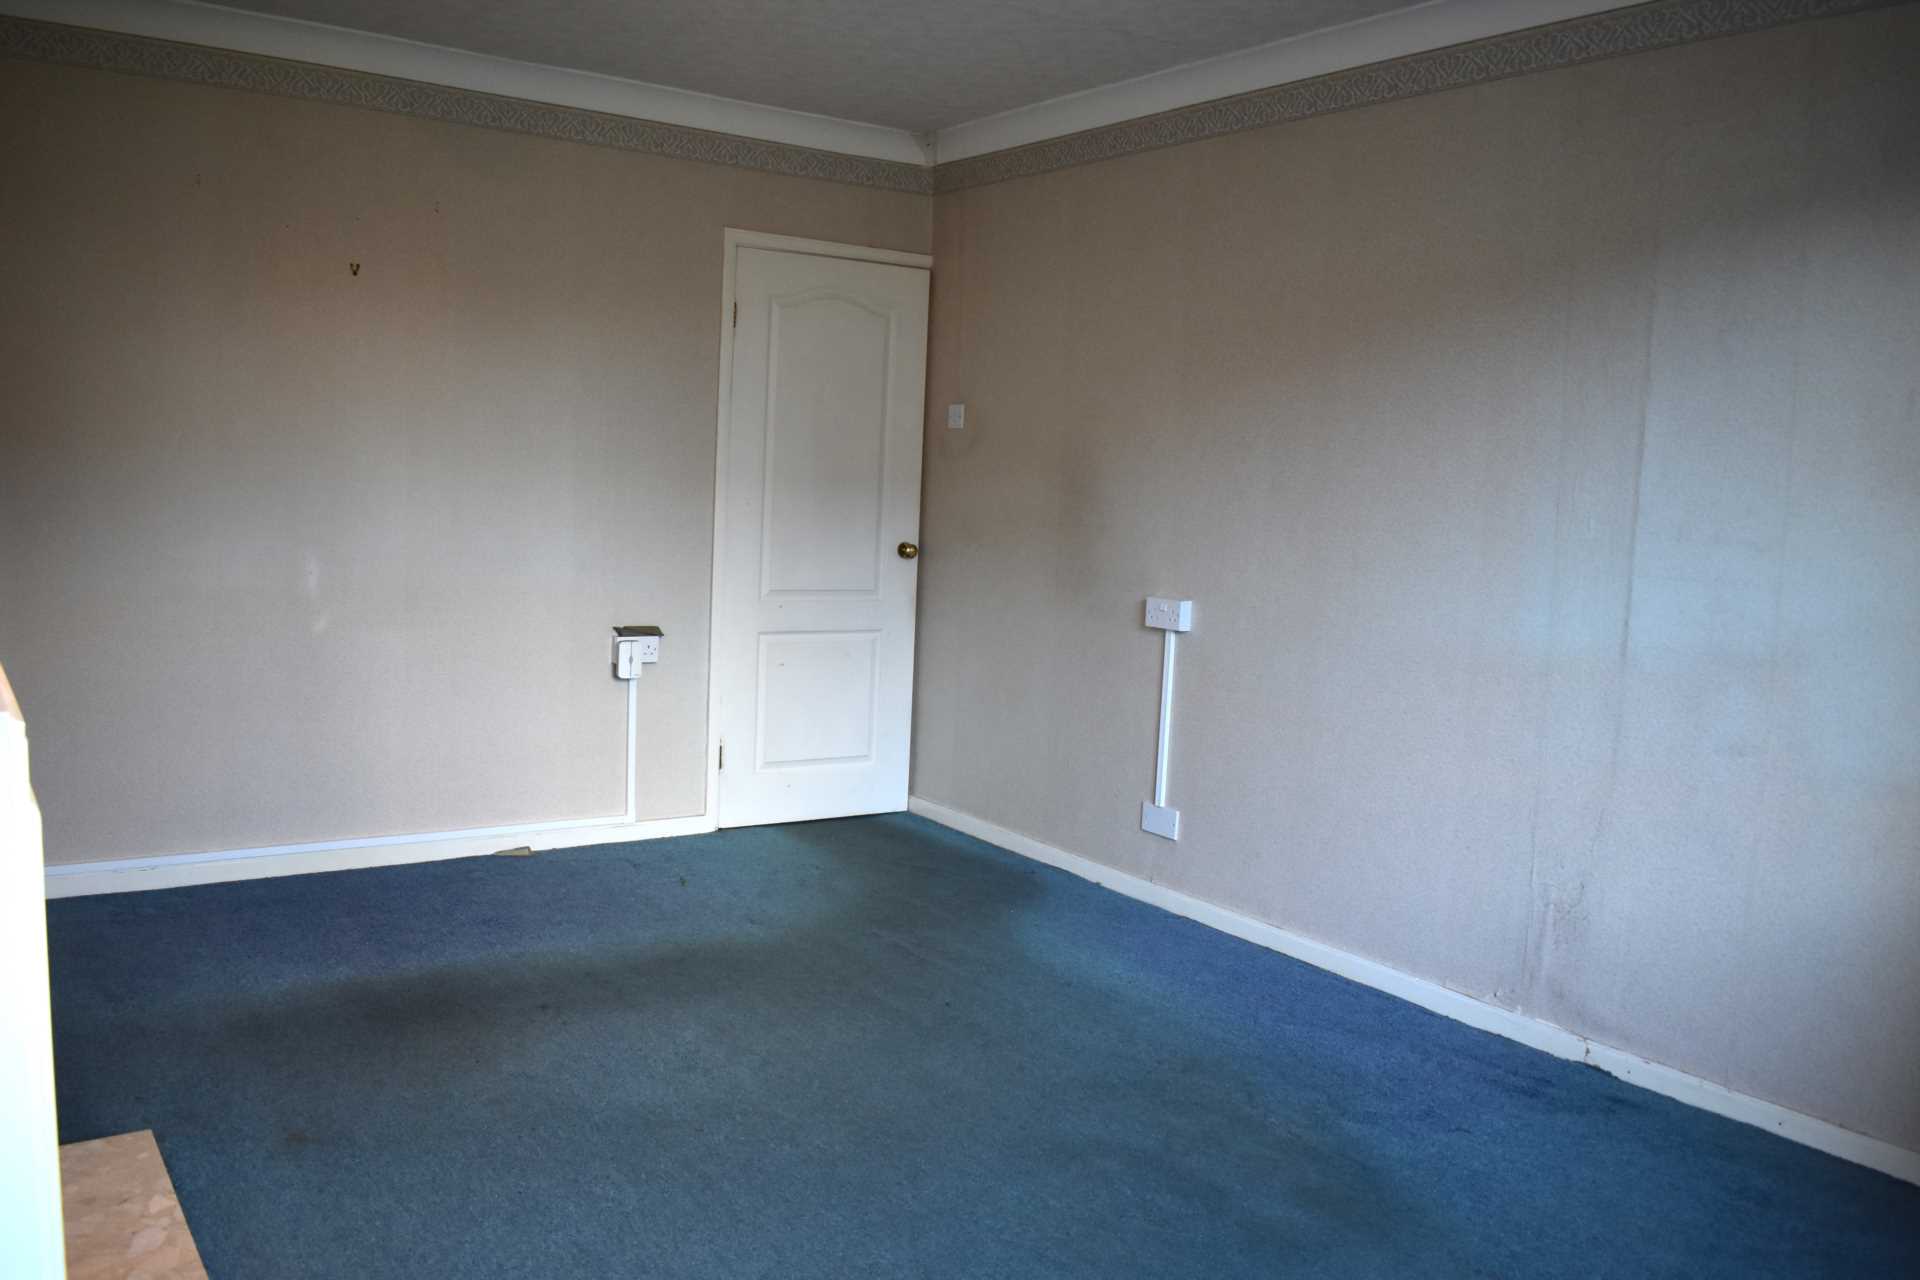 (2 or 3 Bedrooms) - Lea Gate Close, Harwood, Image 4